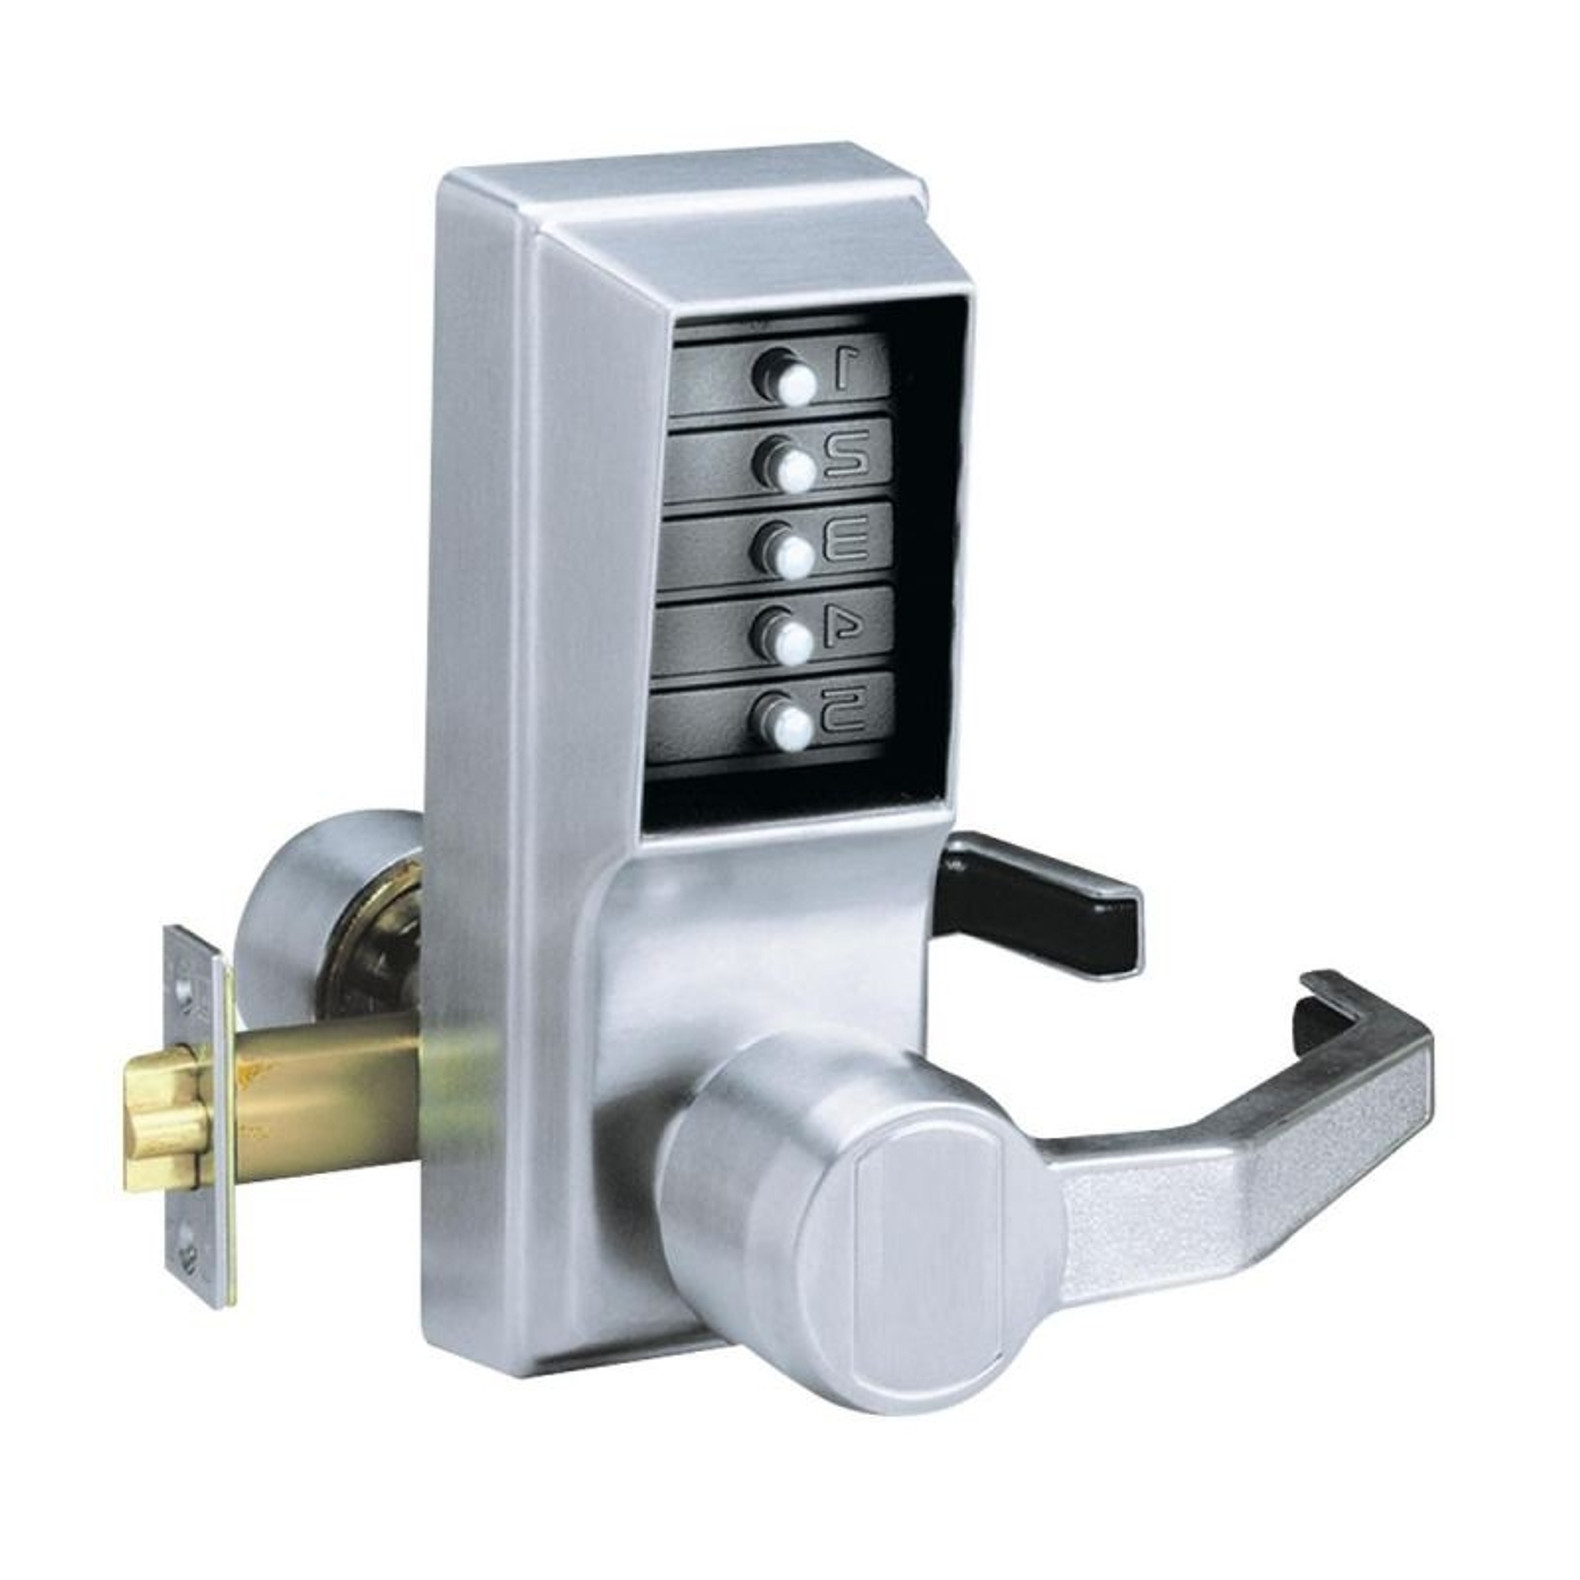 Dormakaba Simplex LR1011-26D-41 Pushbutton Lever Lock with no Key Override  in Satin Chrome KAL DOOR HARDWARE